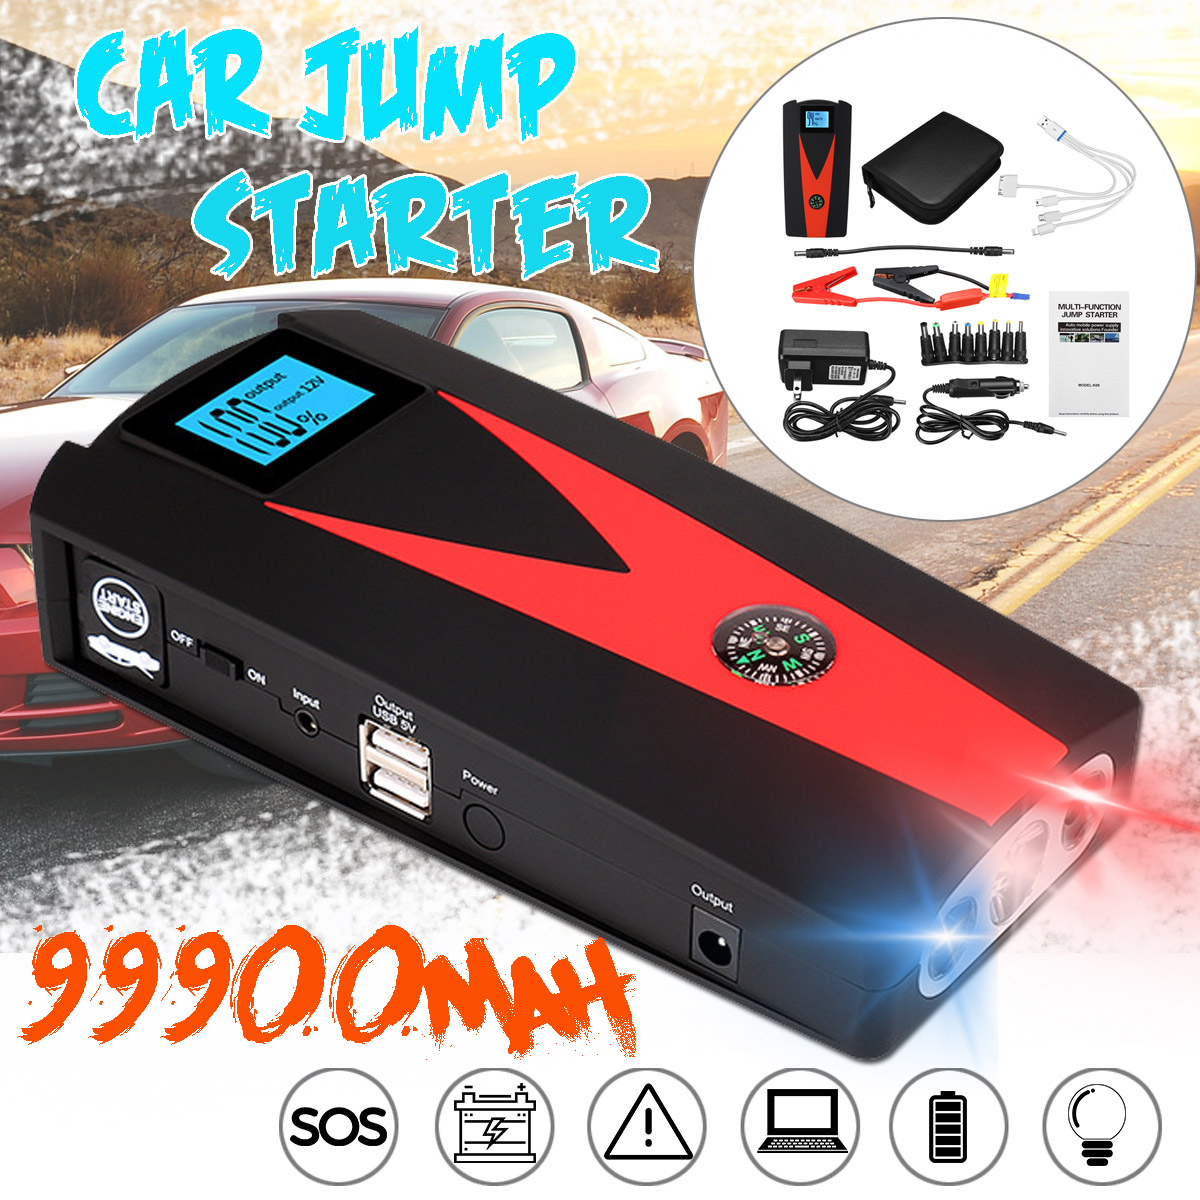 99900-mAh-Dual-USB-Car-Jump-Starter-LCD-Auto-Battery-Booster-Portable-Power-Pack-with-Jumper-Cables-1421905-1